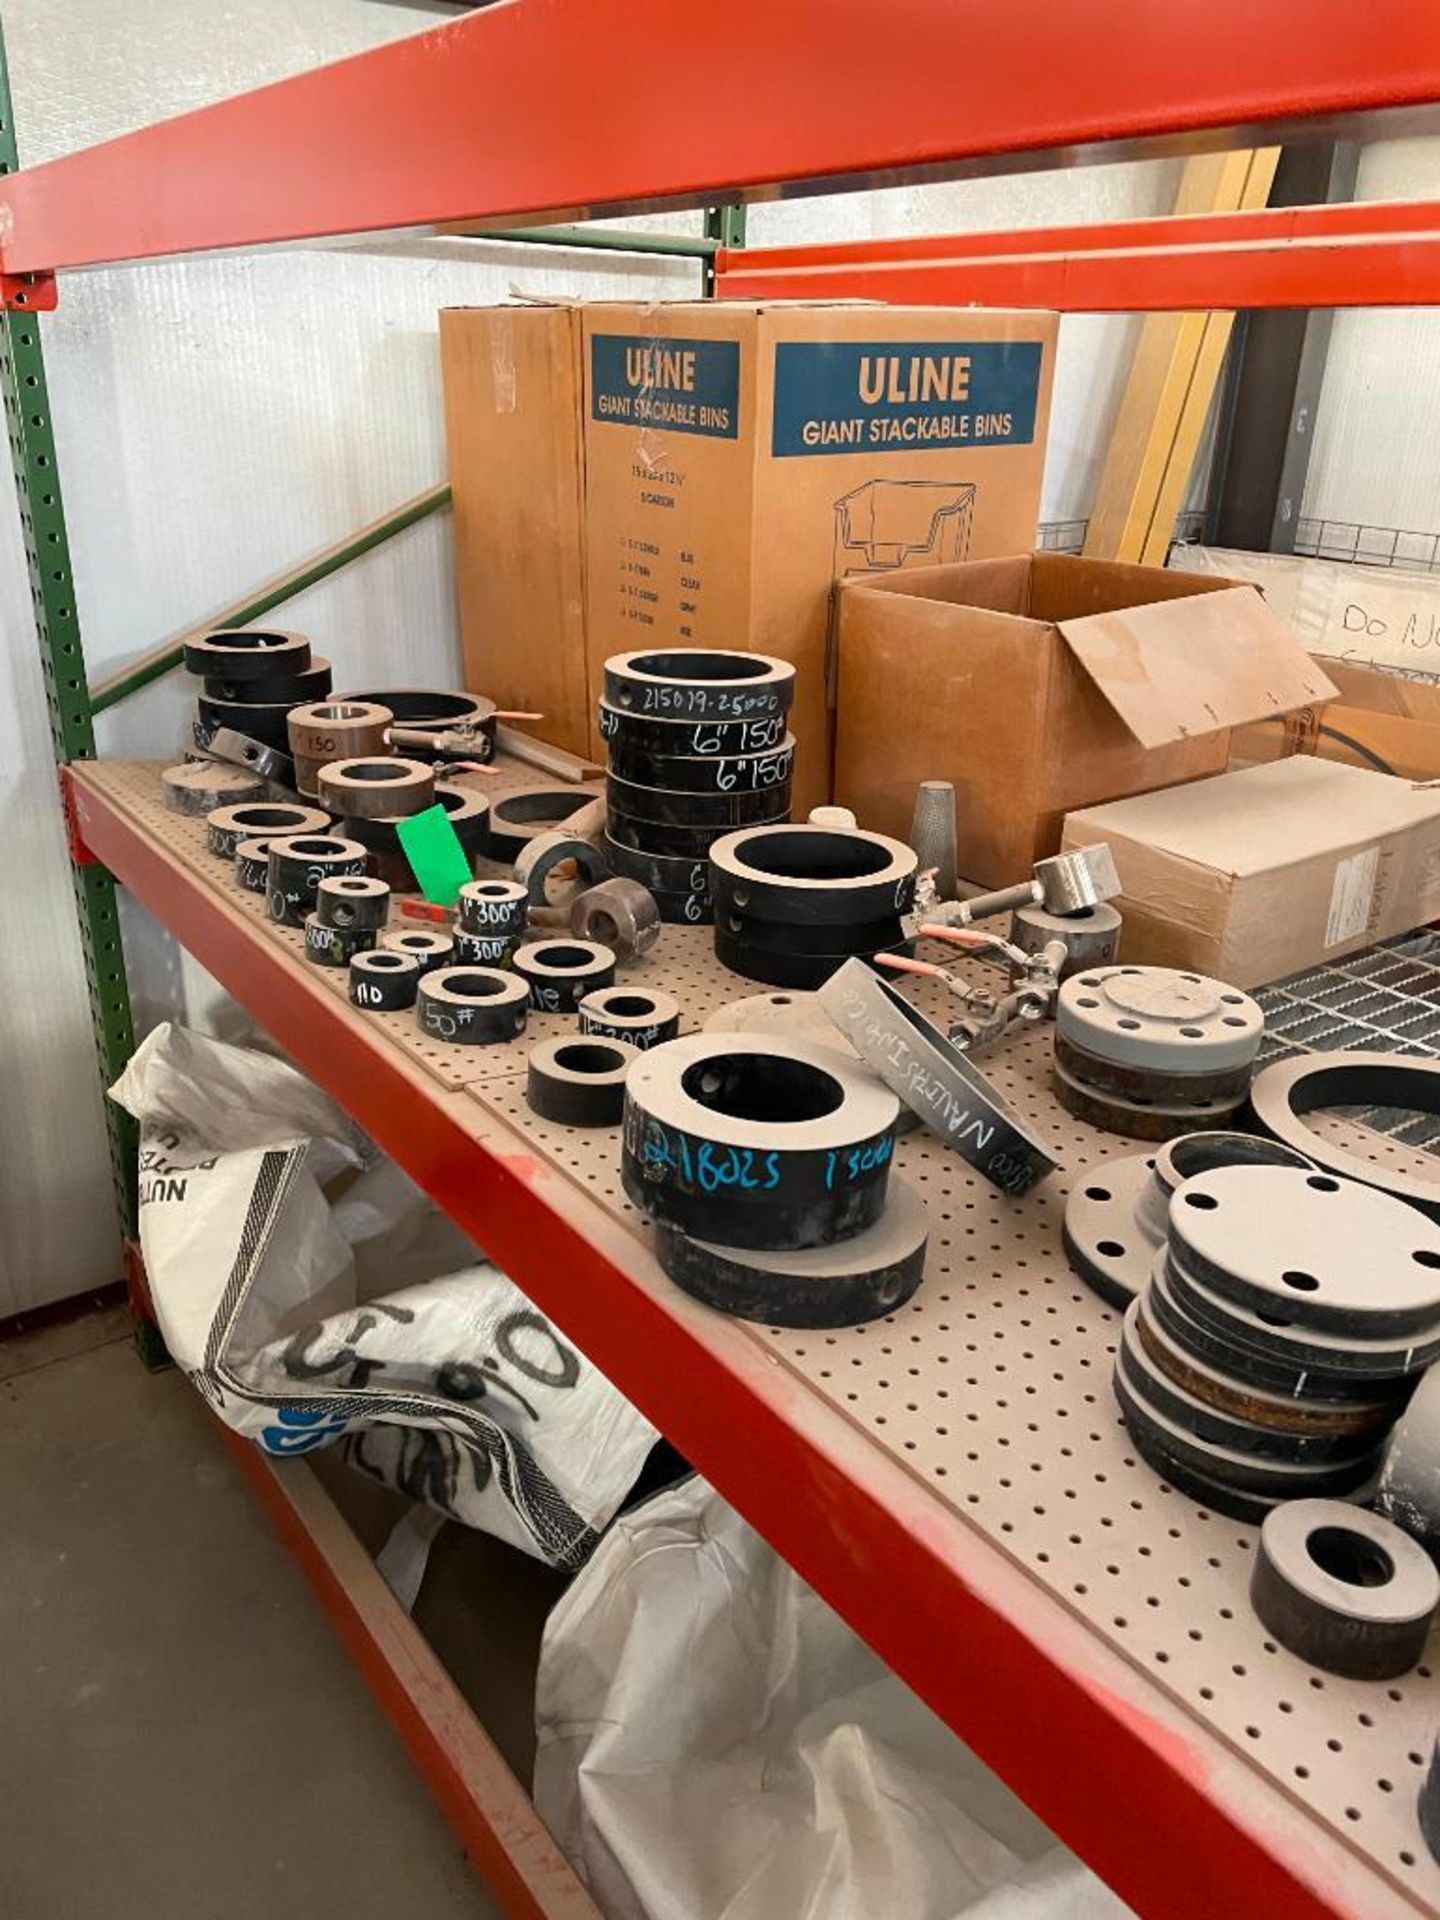 CONTENT OF SHELVING IN SHIPPING AND RECEIVING BUILDING: NEW VALVES, FLEX SEAL GASKETS, PIPE FITTINGS - Image 17 of 20